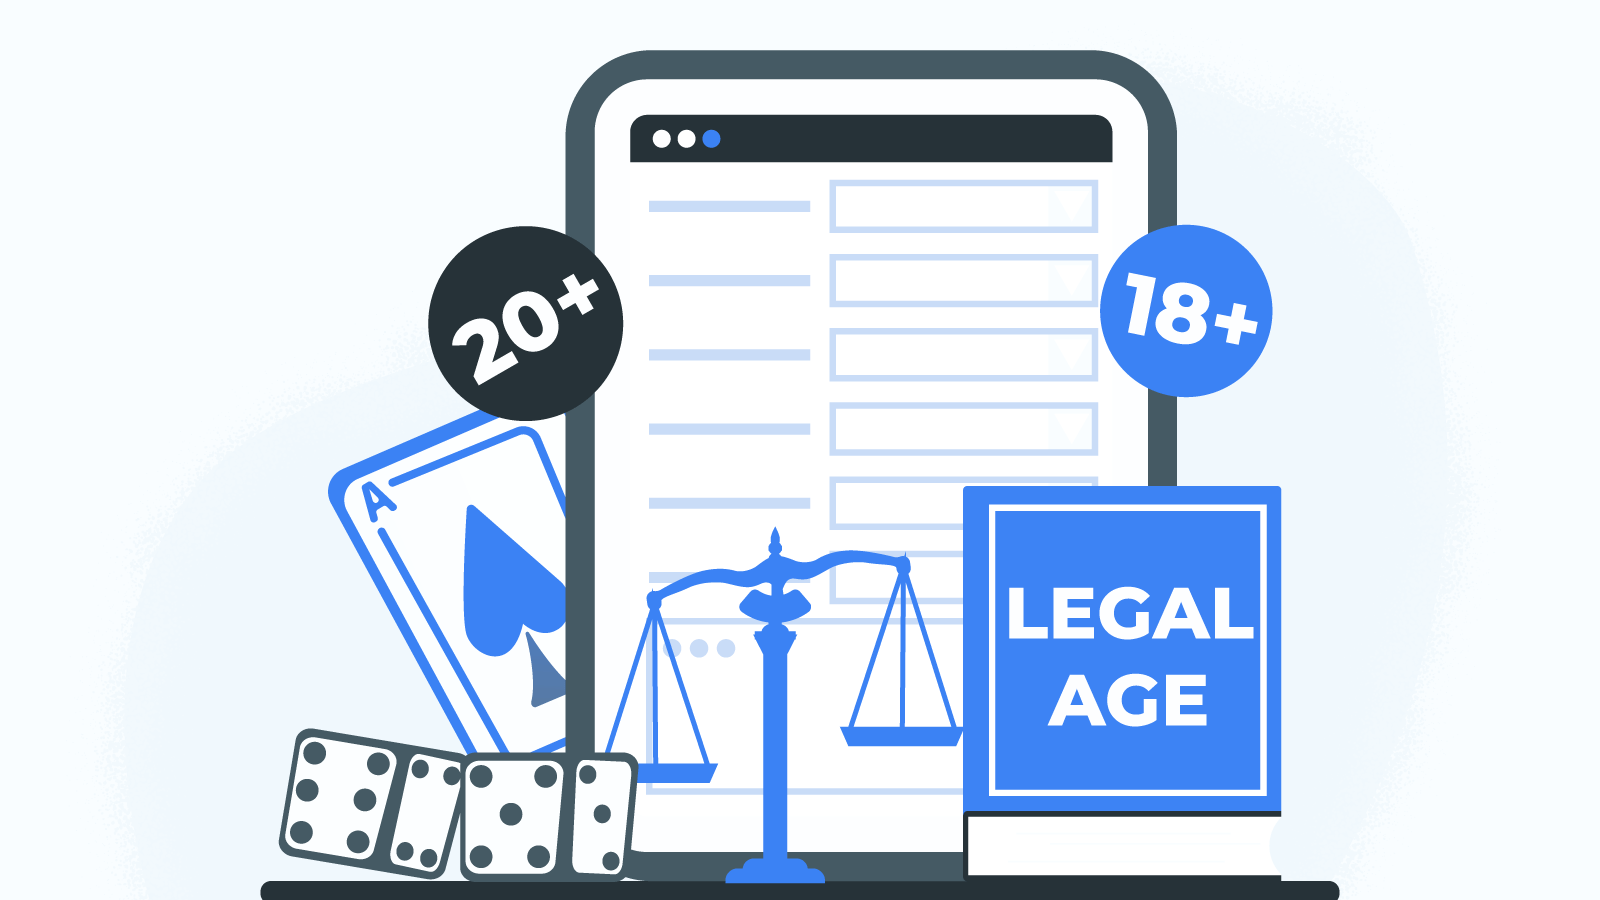 Legal gambling age in New Zealand